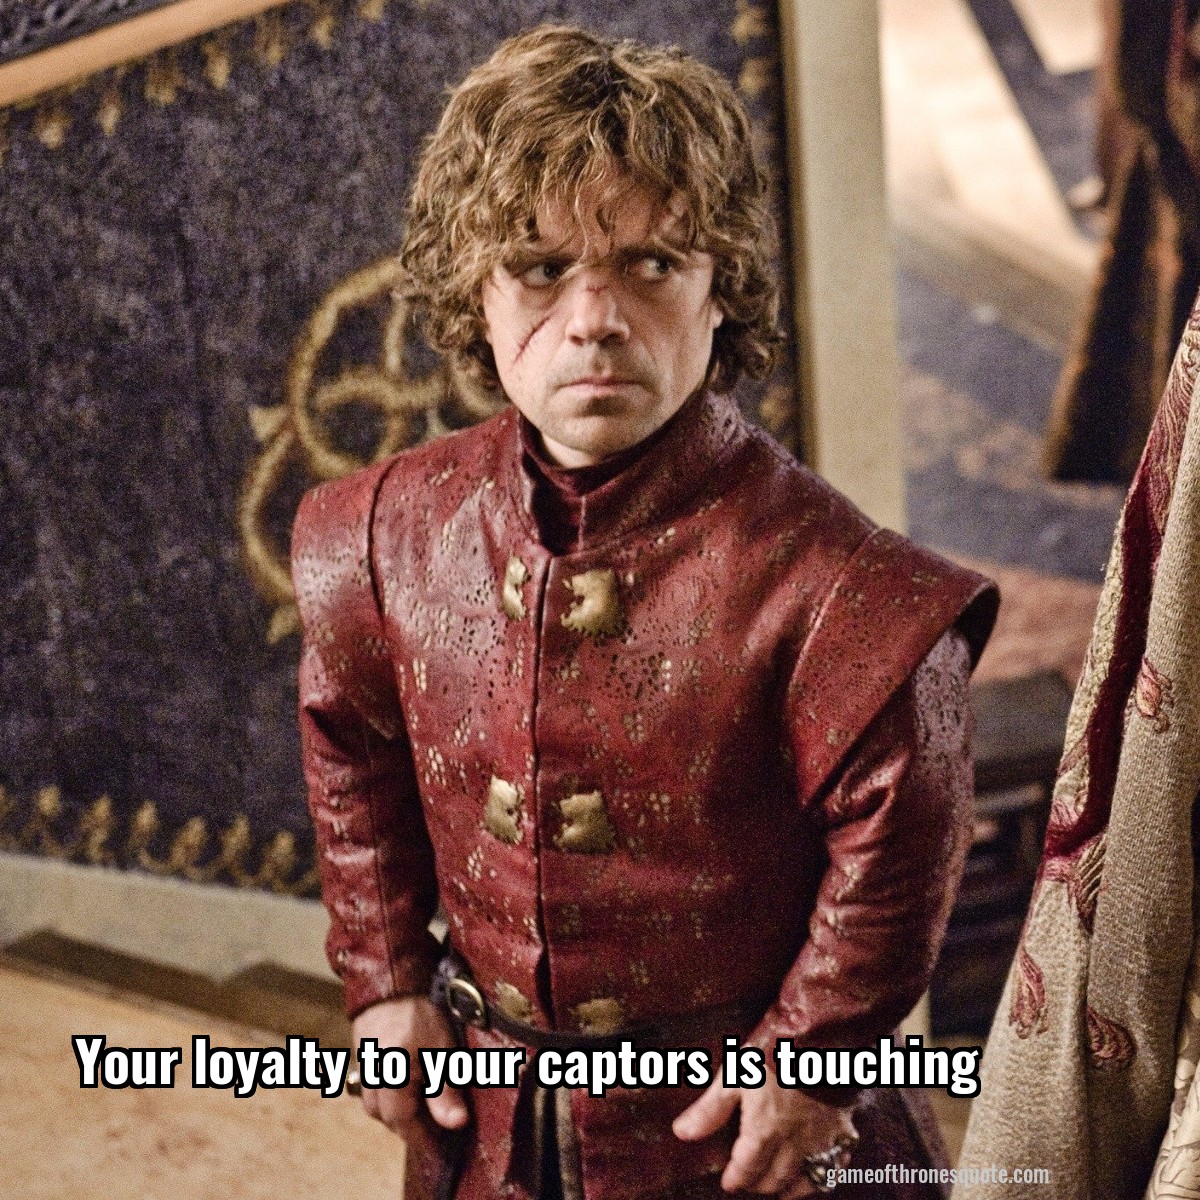 Your loyalty to your captors is touching